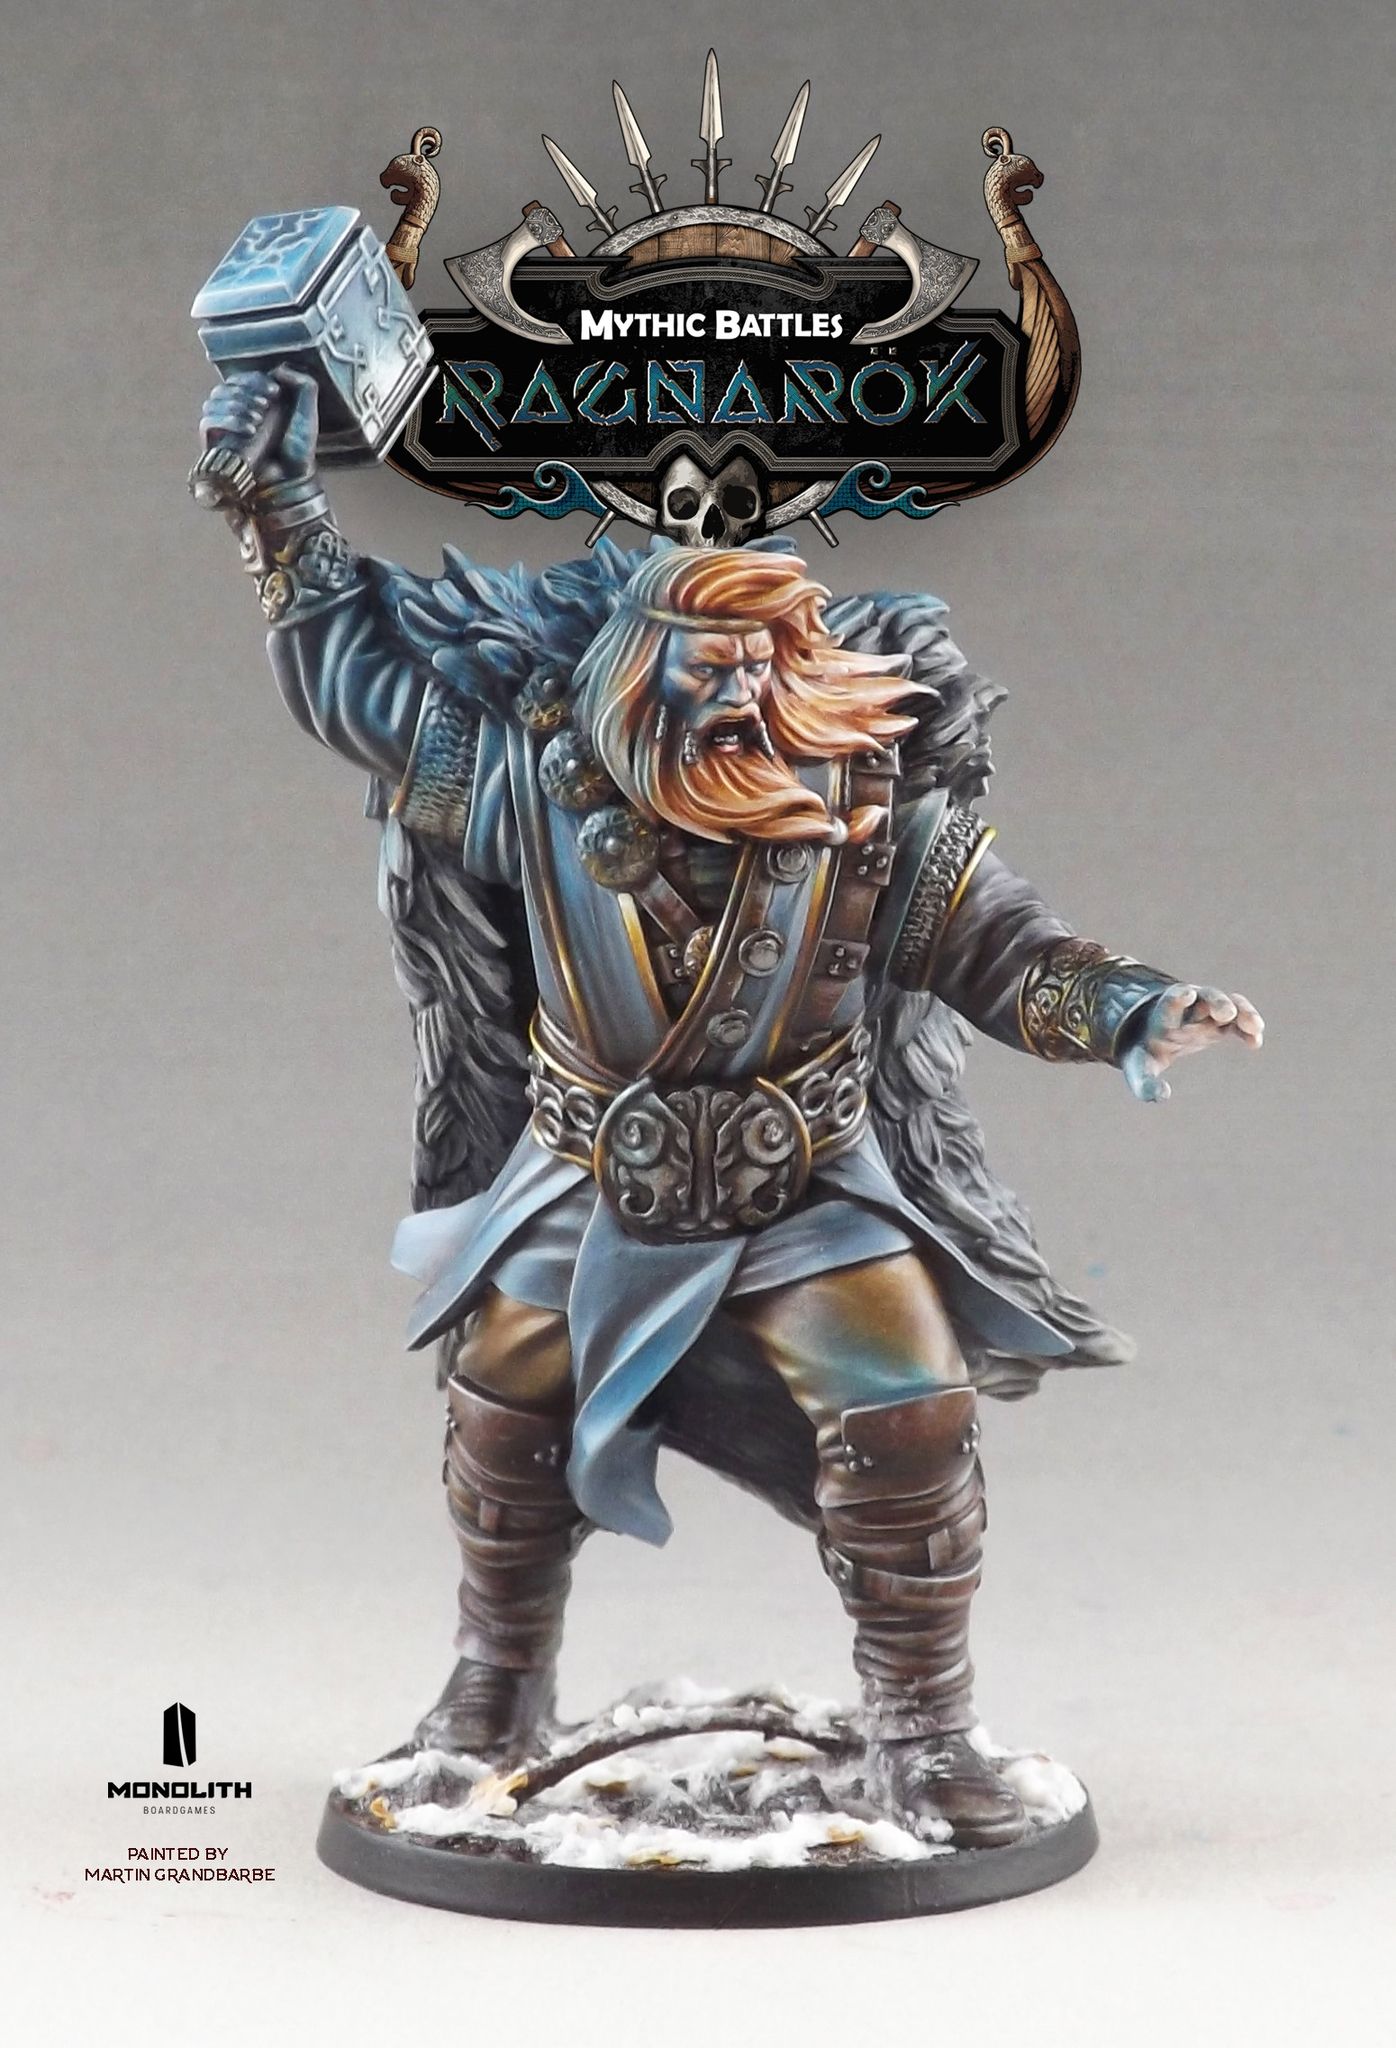 Monolith Preview The Mighty Thor For Mythic Battles: Ragnarok